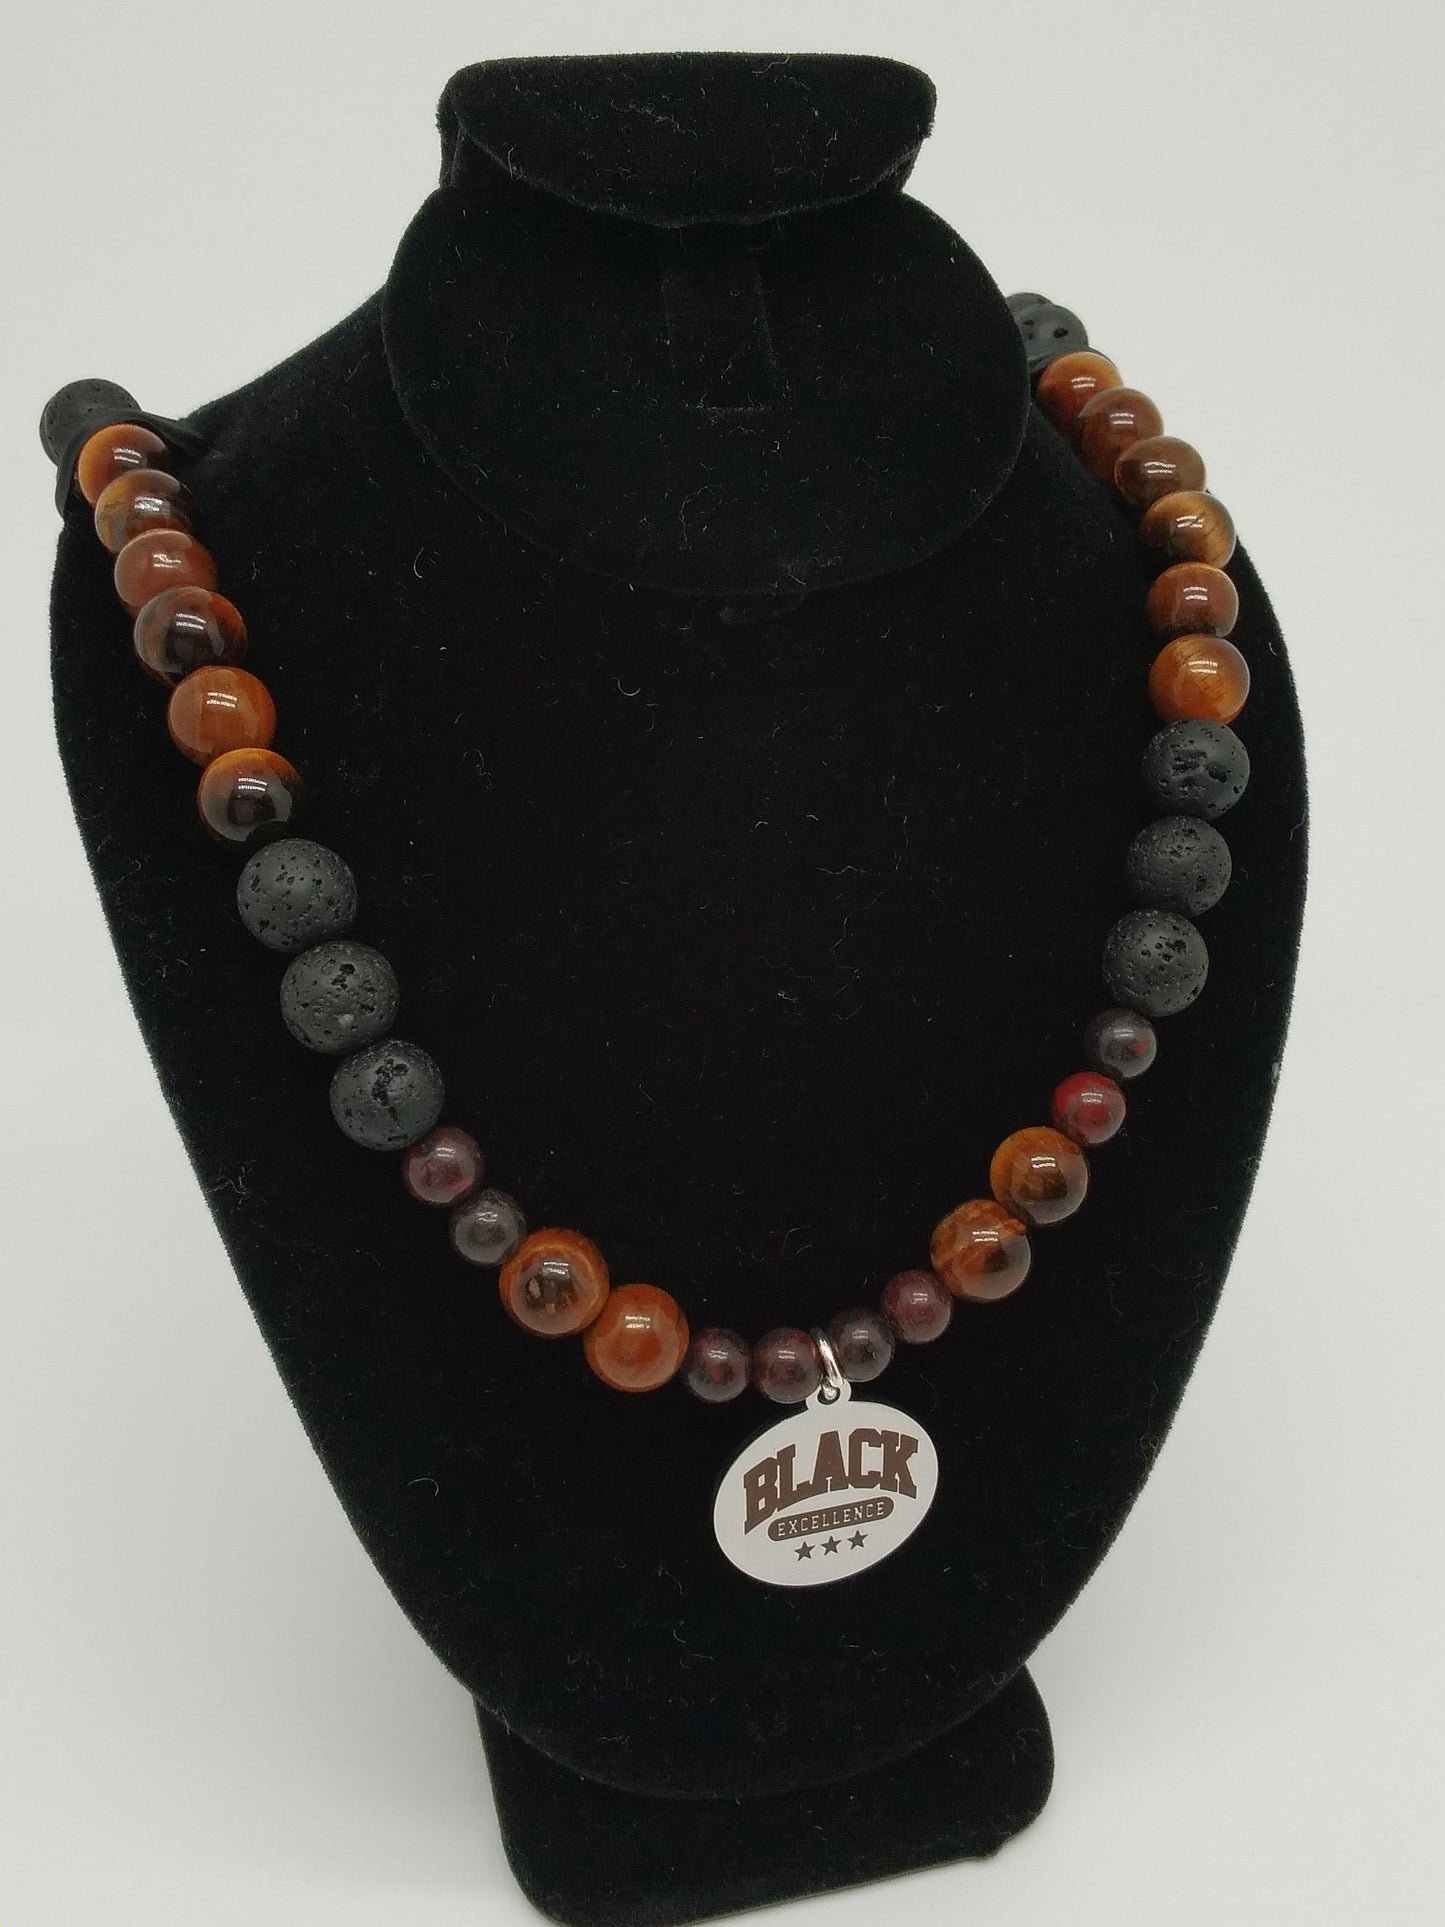 "Black Excellence" Boys Tigers Eye and Lava Stone Beaded Necklace